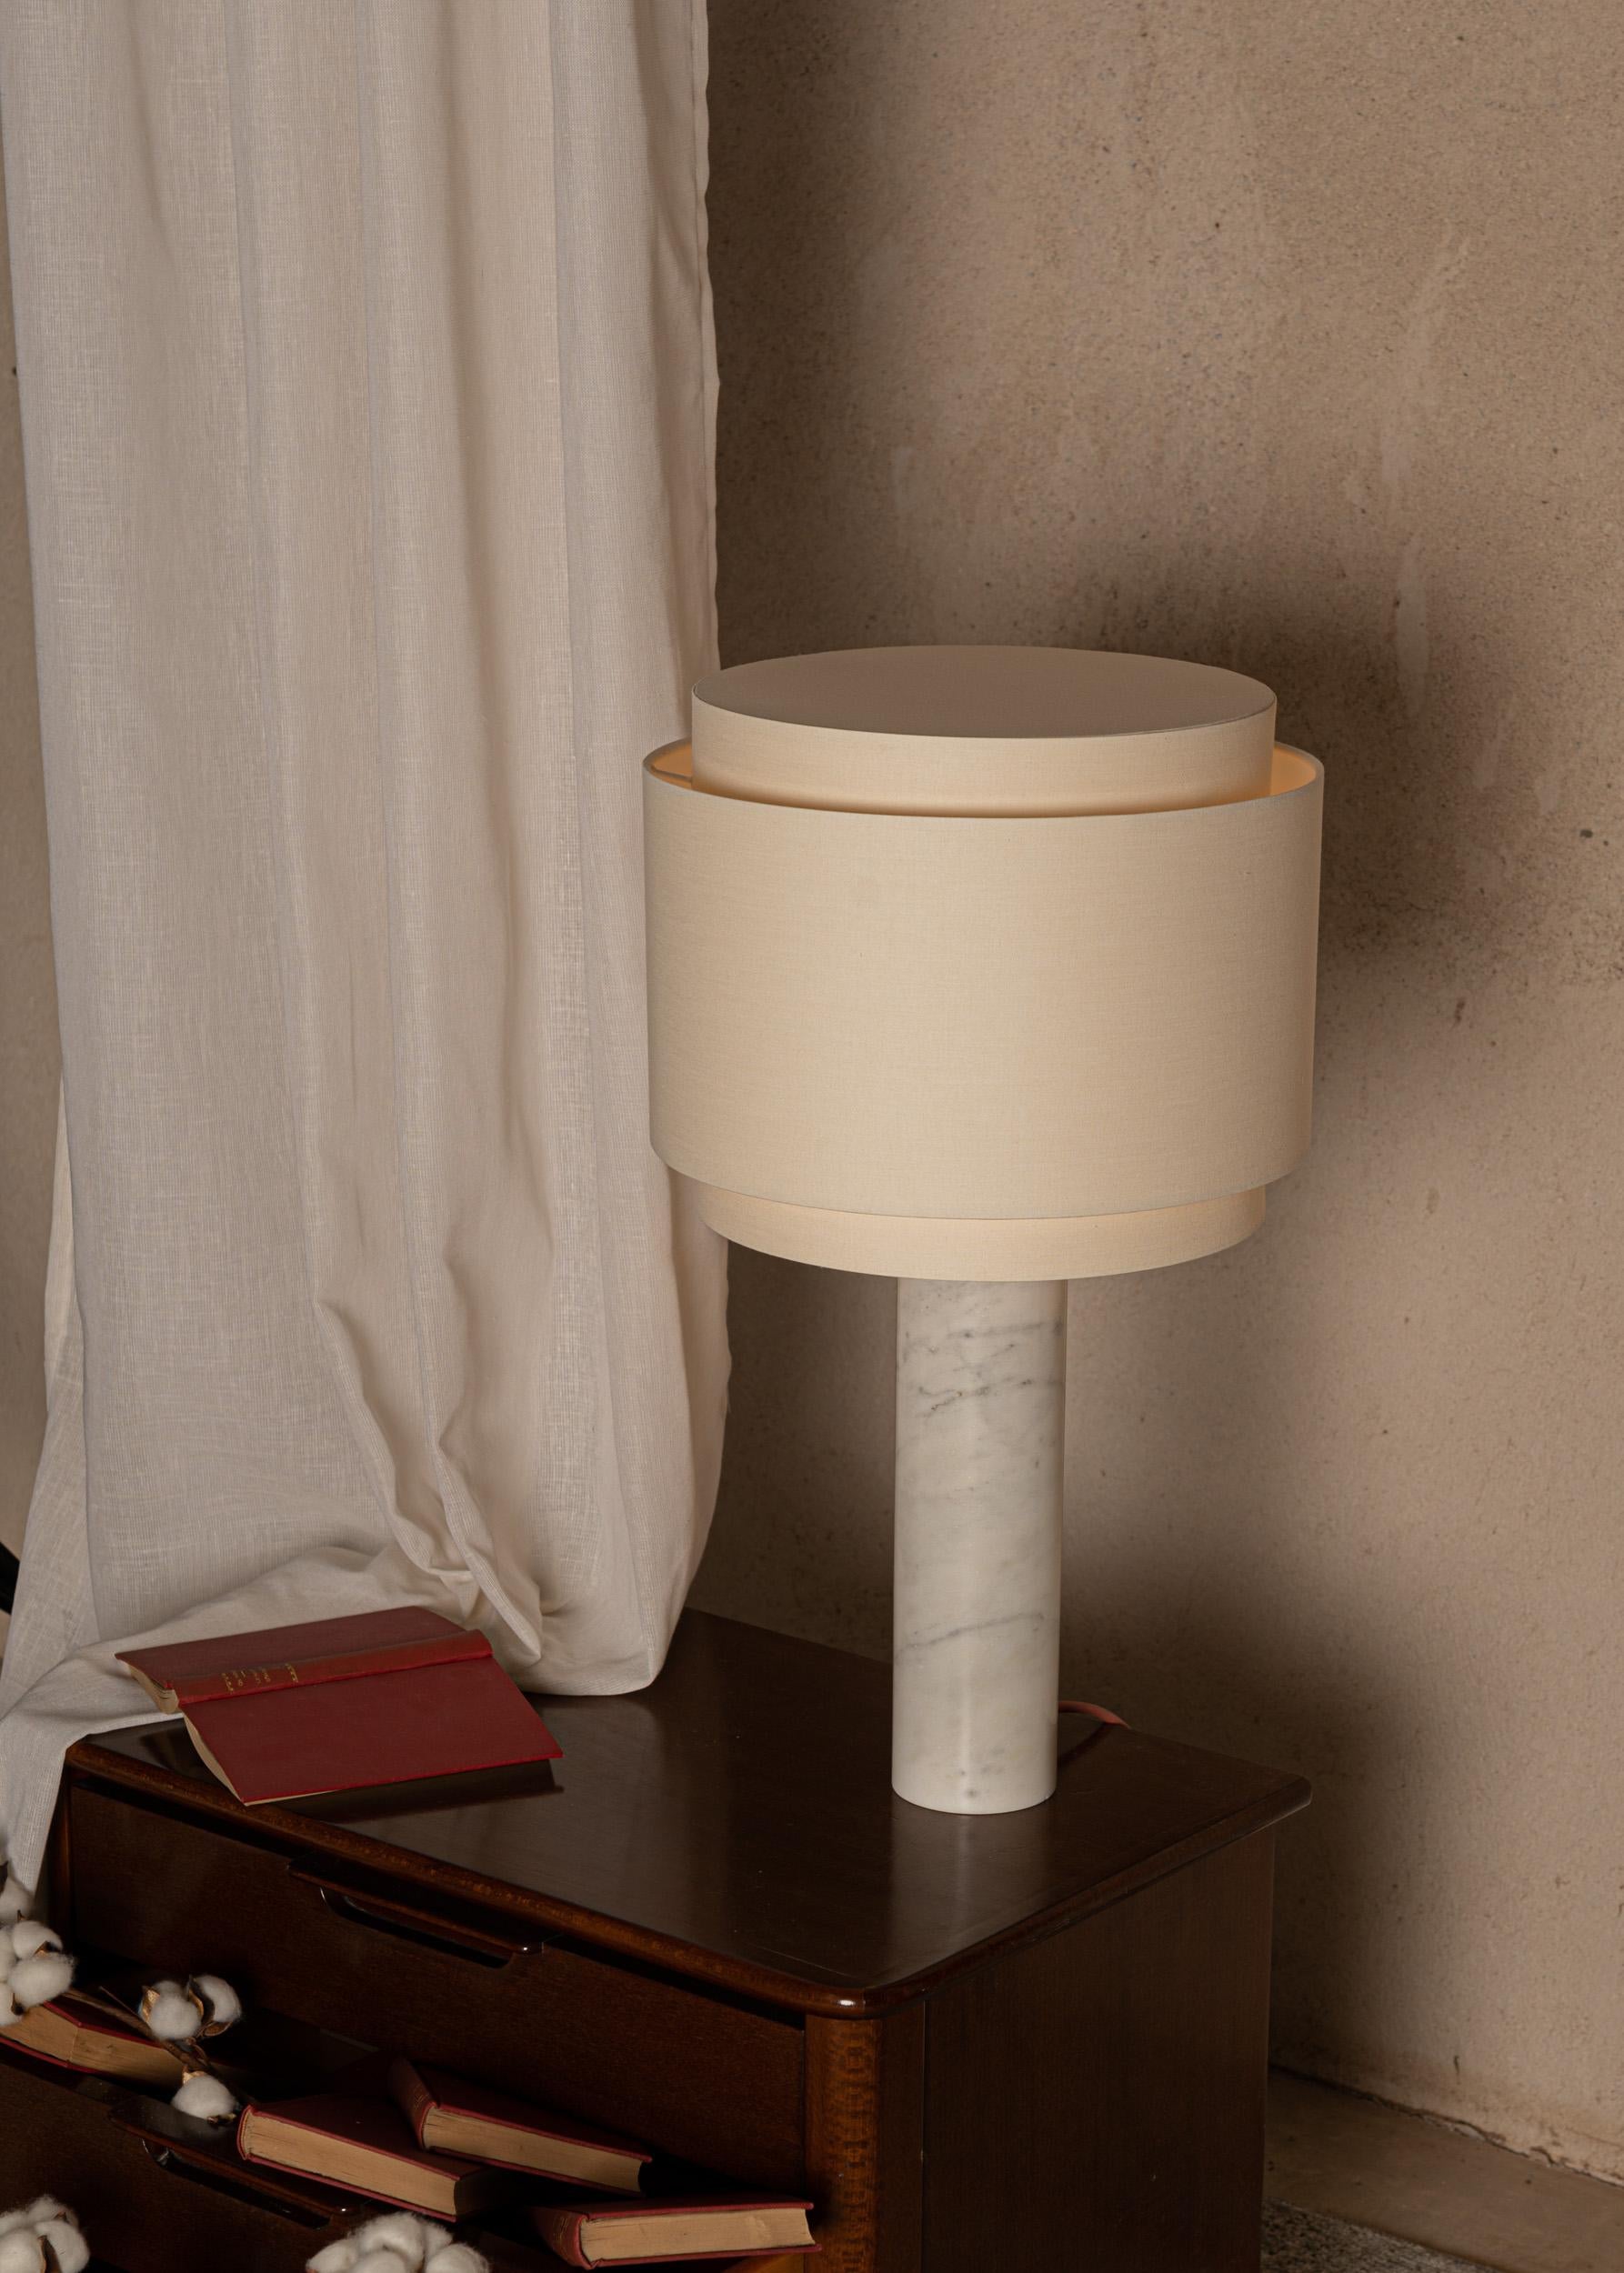 White Marble Pipo Duoble Table Lamp by Simone & Marcel
Dimensions: D 35 x W 35 x H 60 cm.
Materials: Cotton and white marble.

Also available in different marble and wood options and finishes. Custom options available on request. Please contact us.